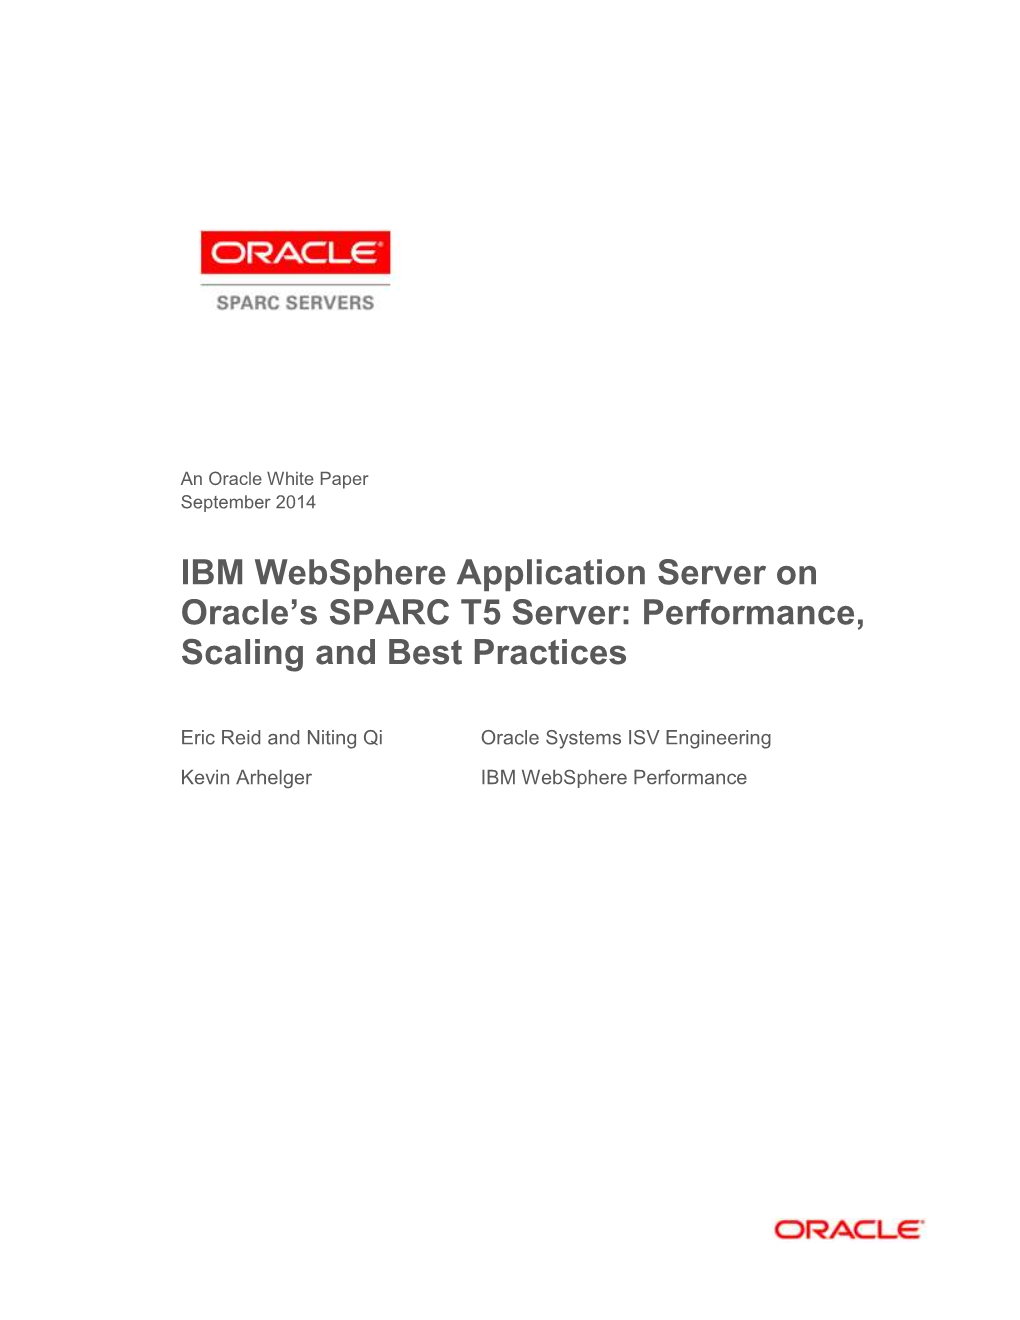 An Analysis of Performance, Scaling, and Best Practices for IBM Websphere Application Server on Oracle's SPARC T-Series Server